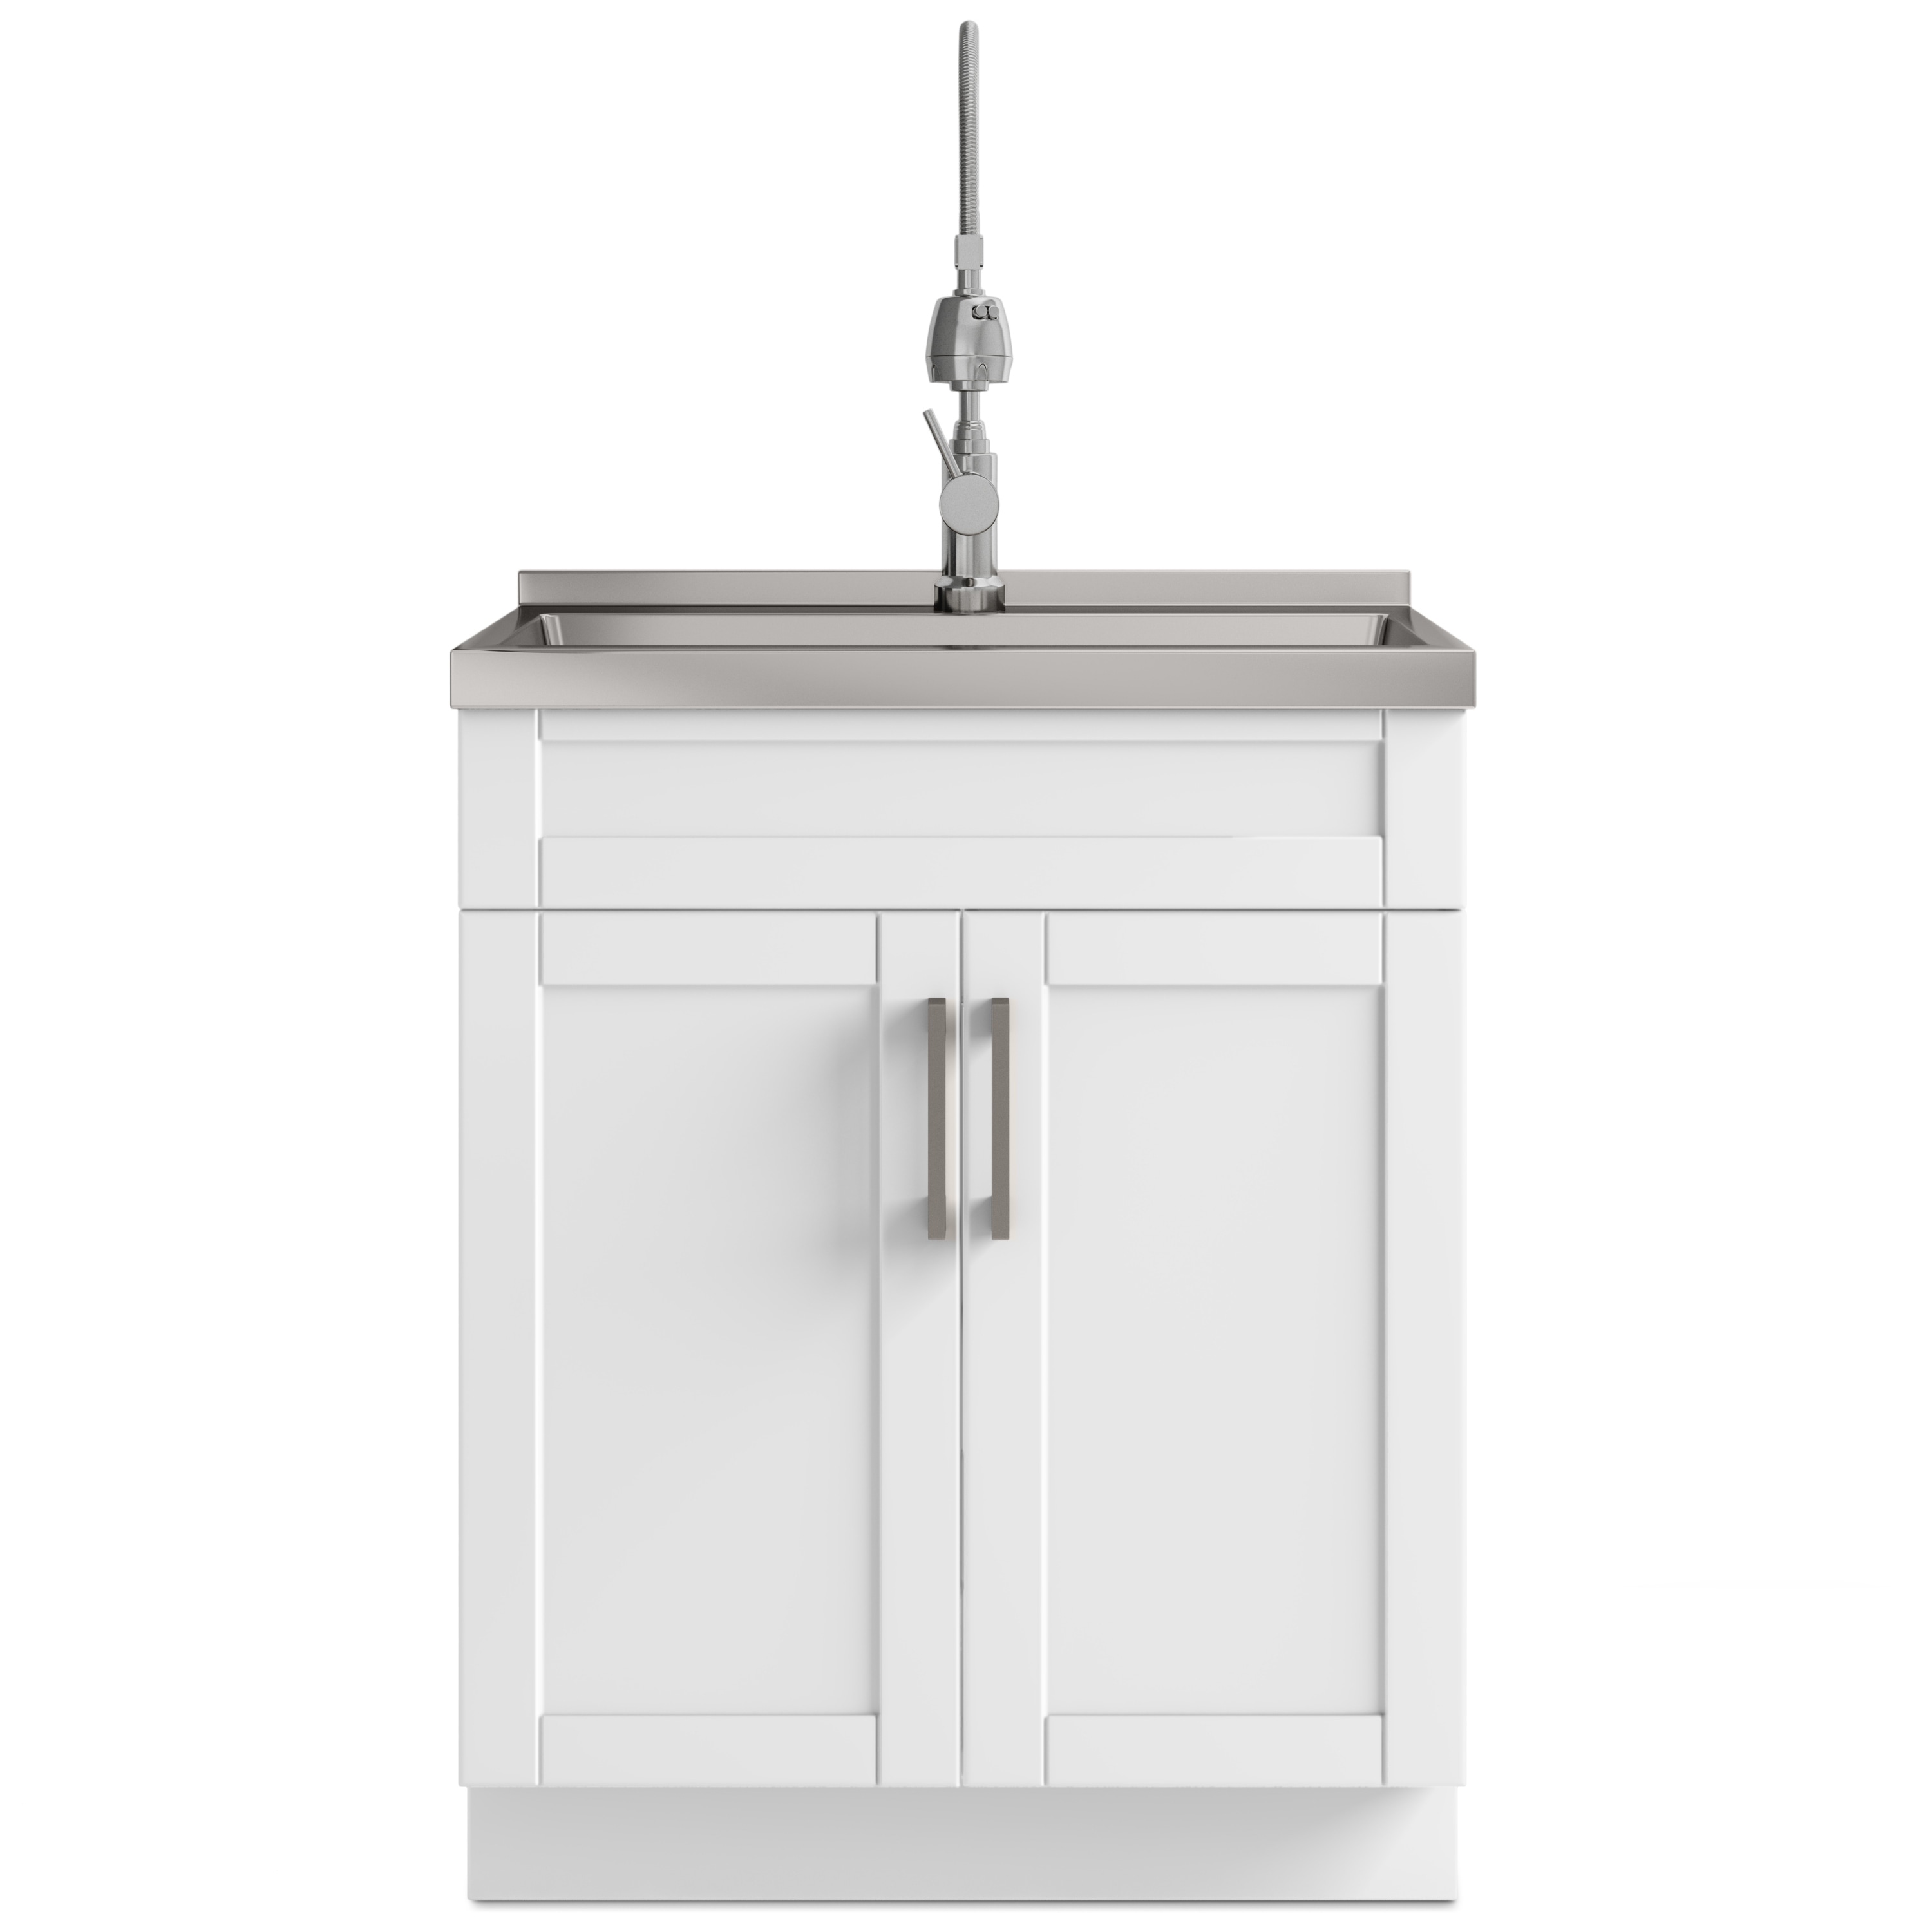 https://ak1.ostkcdn.com/images/products/is/images/direct/ec5efb05ad1bf48e8e71a347bc4bc533a292293c/WYNDENHALL-Hartland-Deluxe-Laundry-Cabinet-with-Faucet-and-Stainless-Steel-Sink.jpg